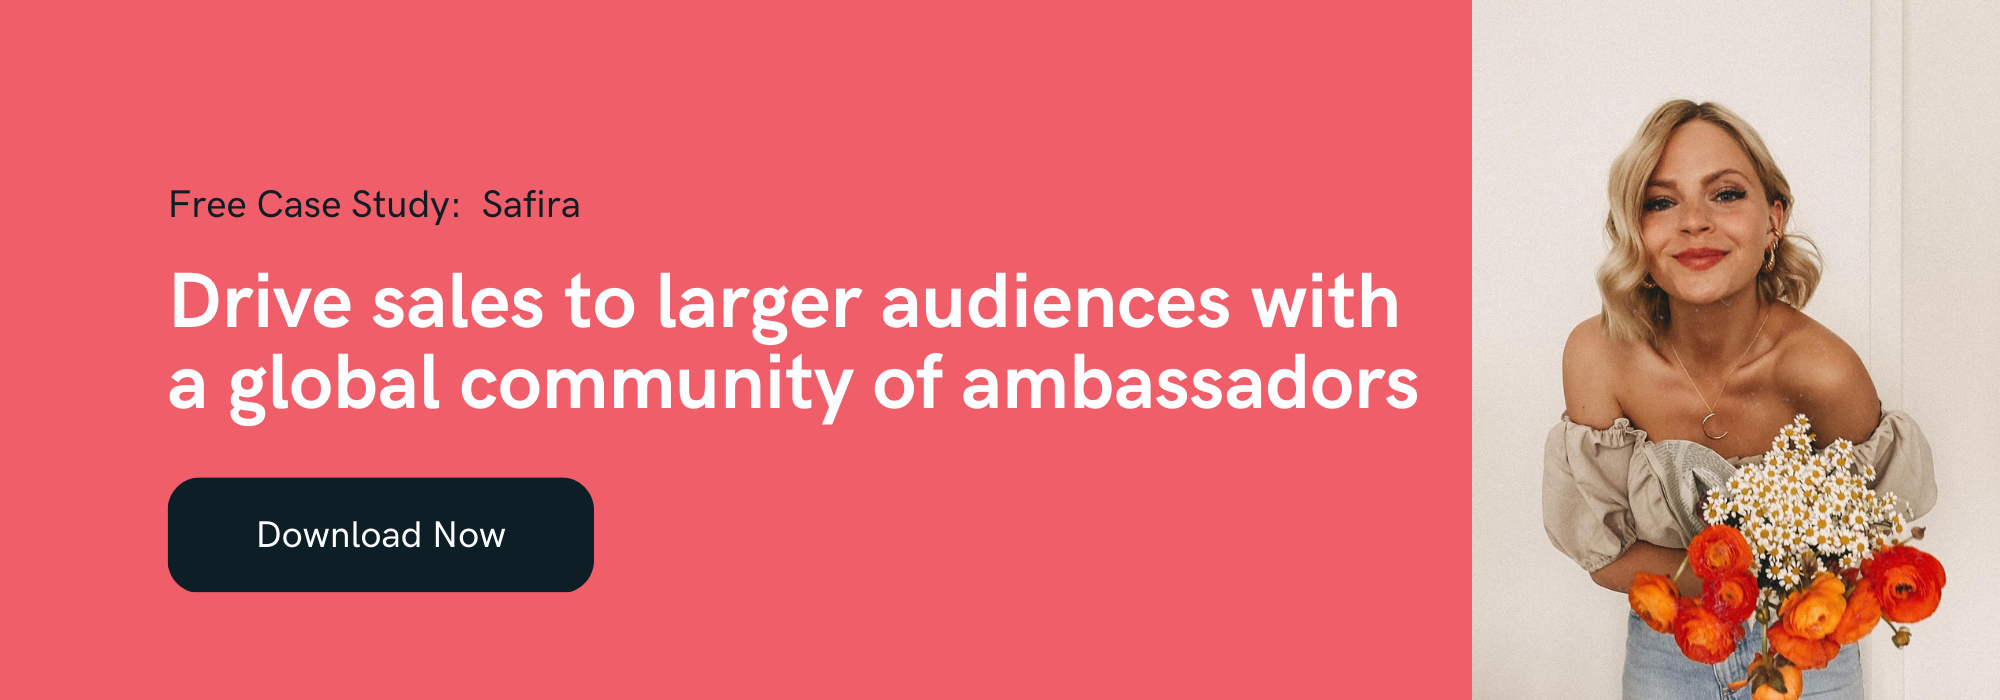 Free case study: Safira. Drive sales to larger audiences with a global community of ambassadors